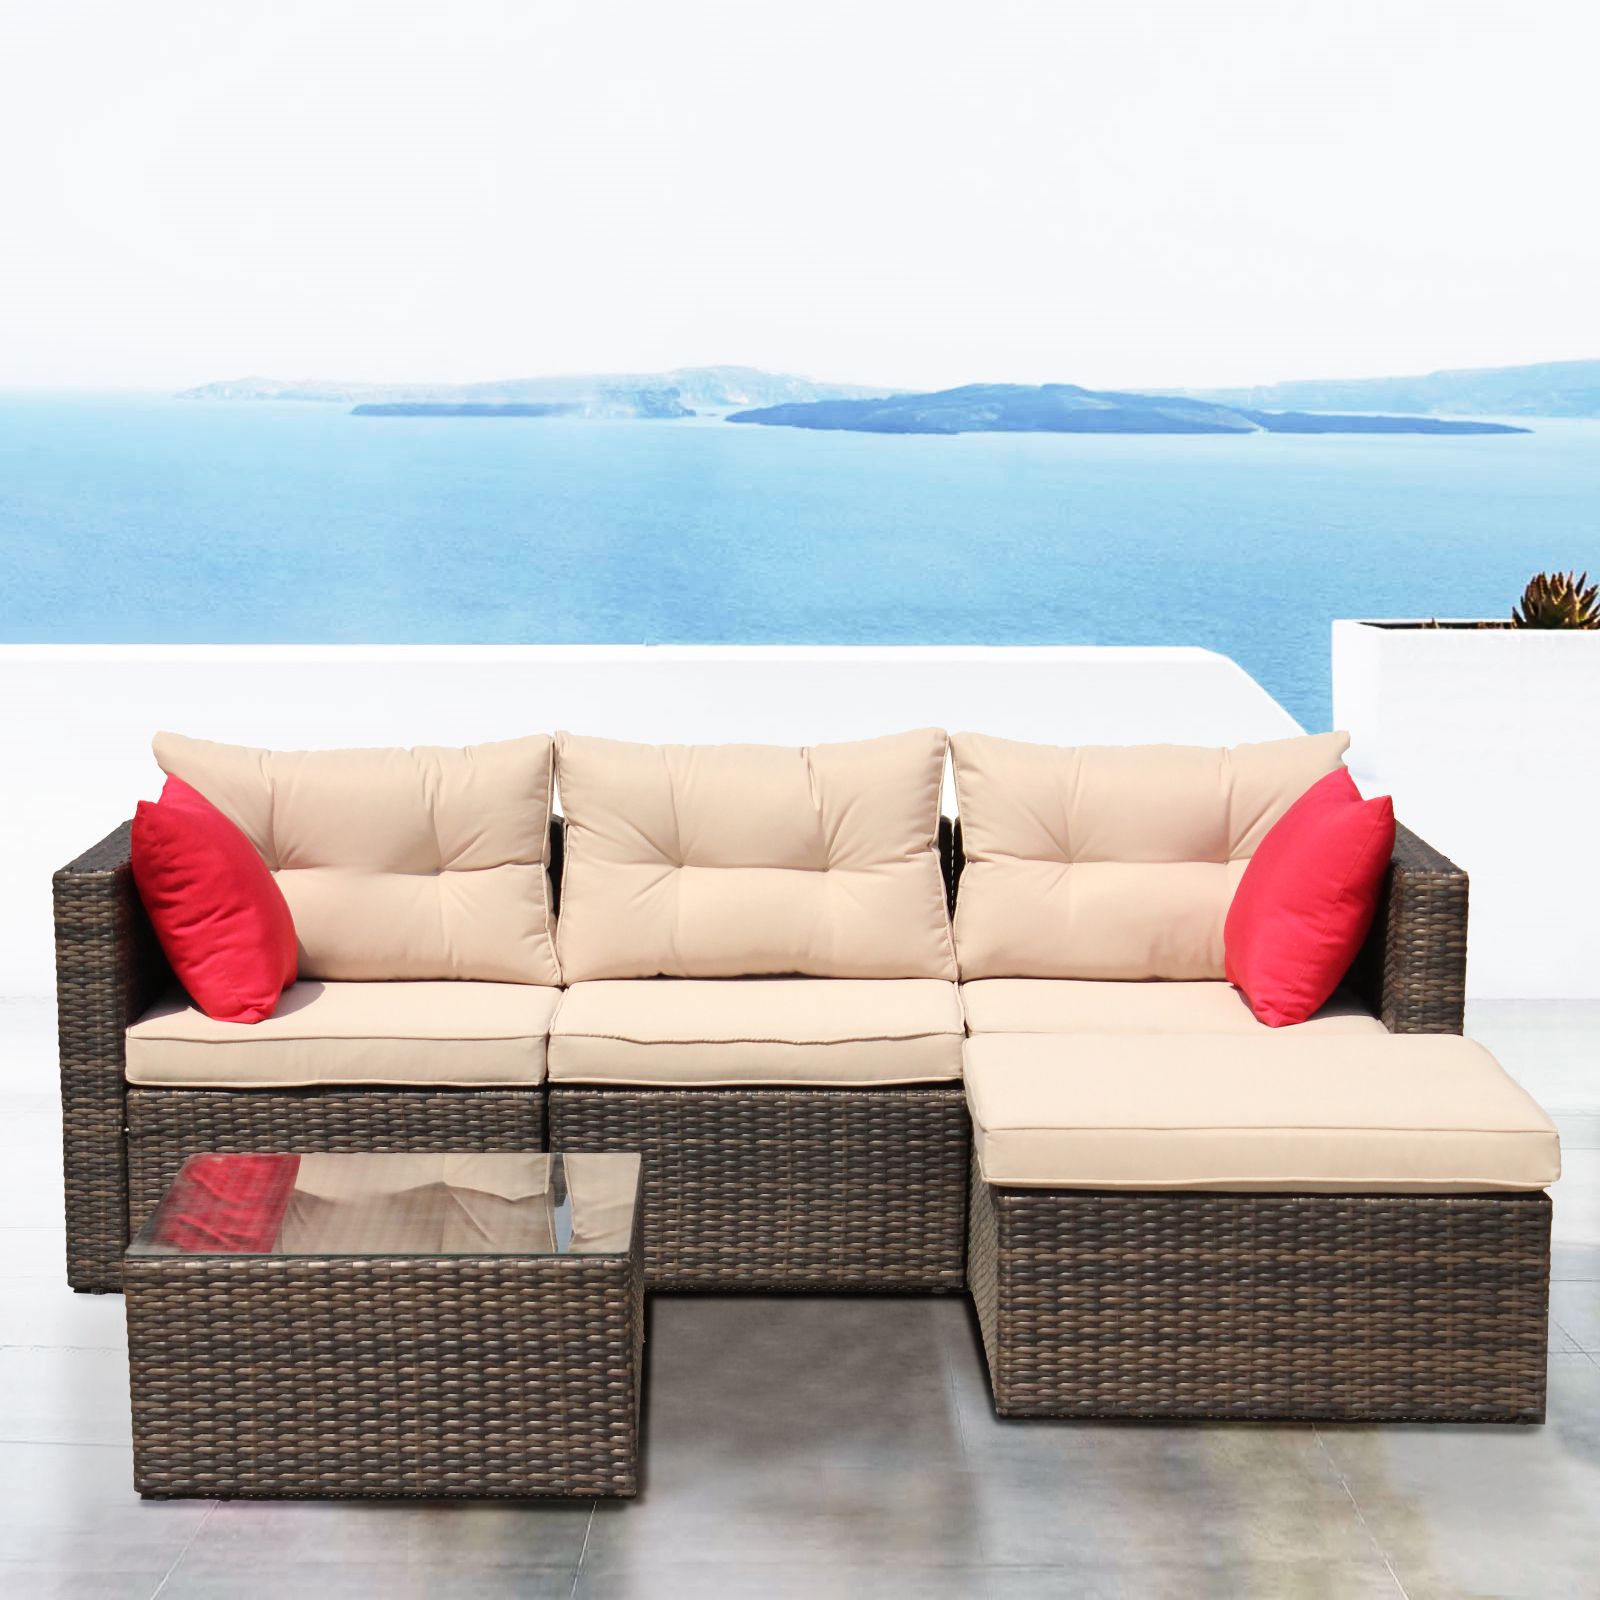 Most Recently Released Outdoor Seating Sectional Patio Sets Inside 5 Pcs Patio Furniture Sets, All Weather Outdoor Sectional Sofa Set (View 15 of 15)